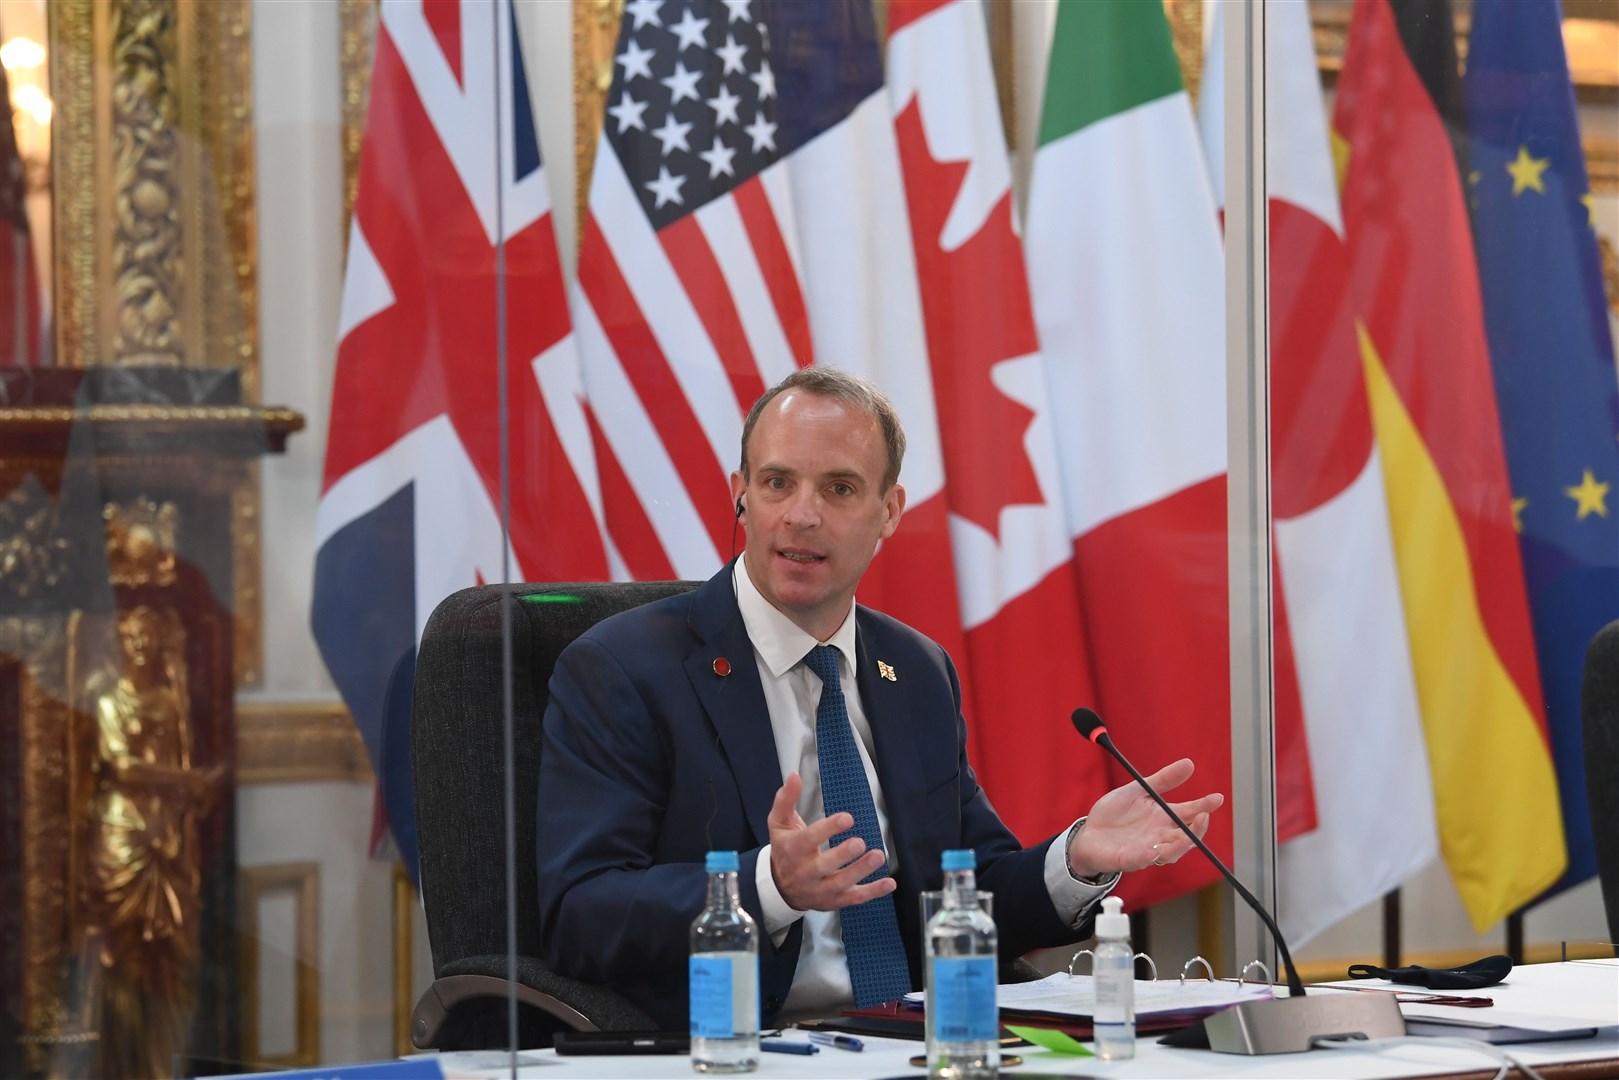 Foreign Secretary Dominic Raab during talks at the G7 meeting at Lancaster House in London (Stefan Rousseau/PA)